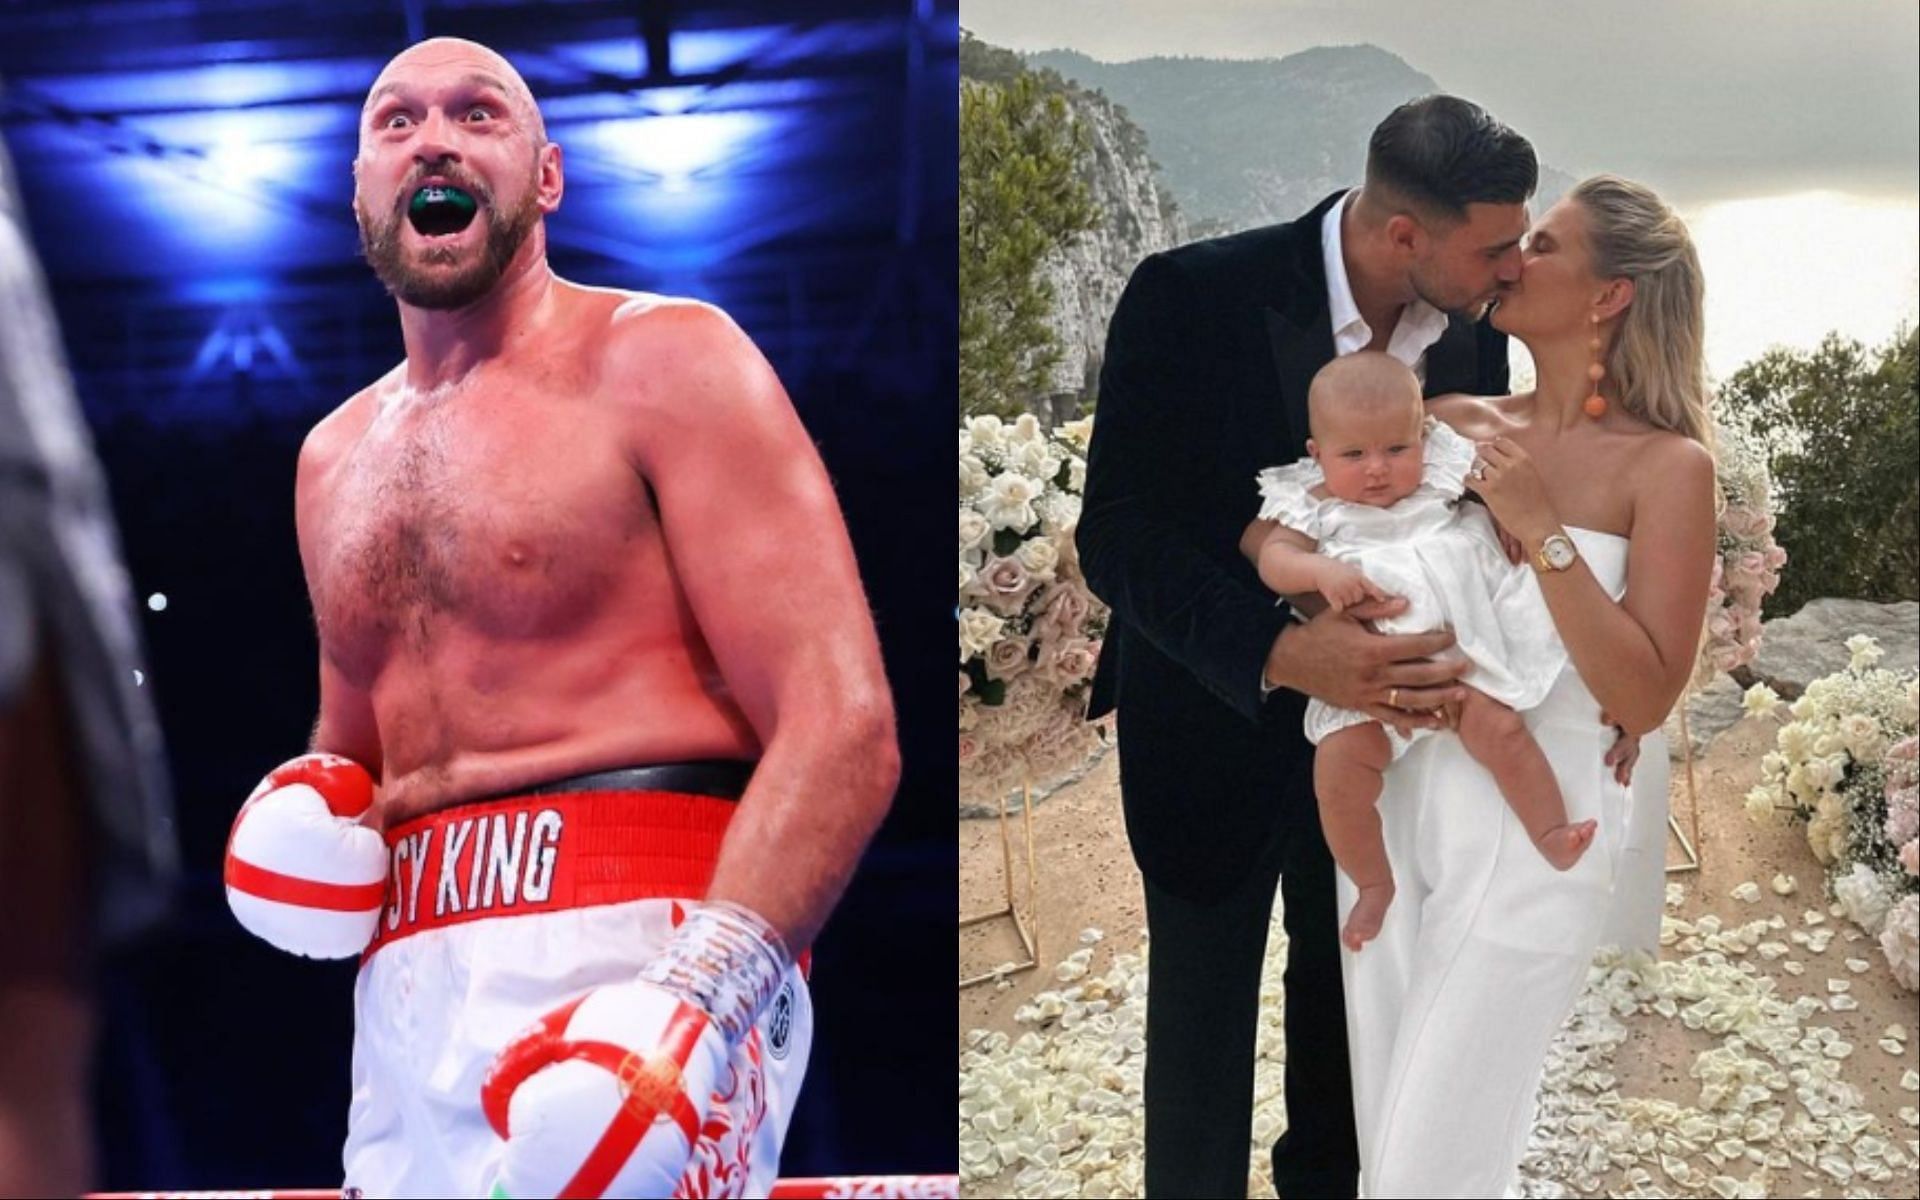 [Images via @tysonfury and @mollymae on Instagram].